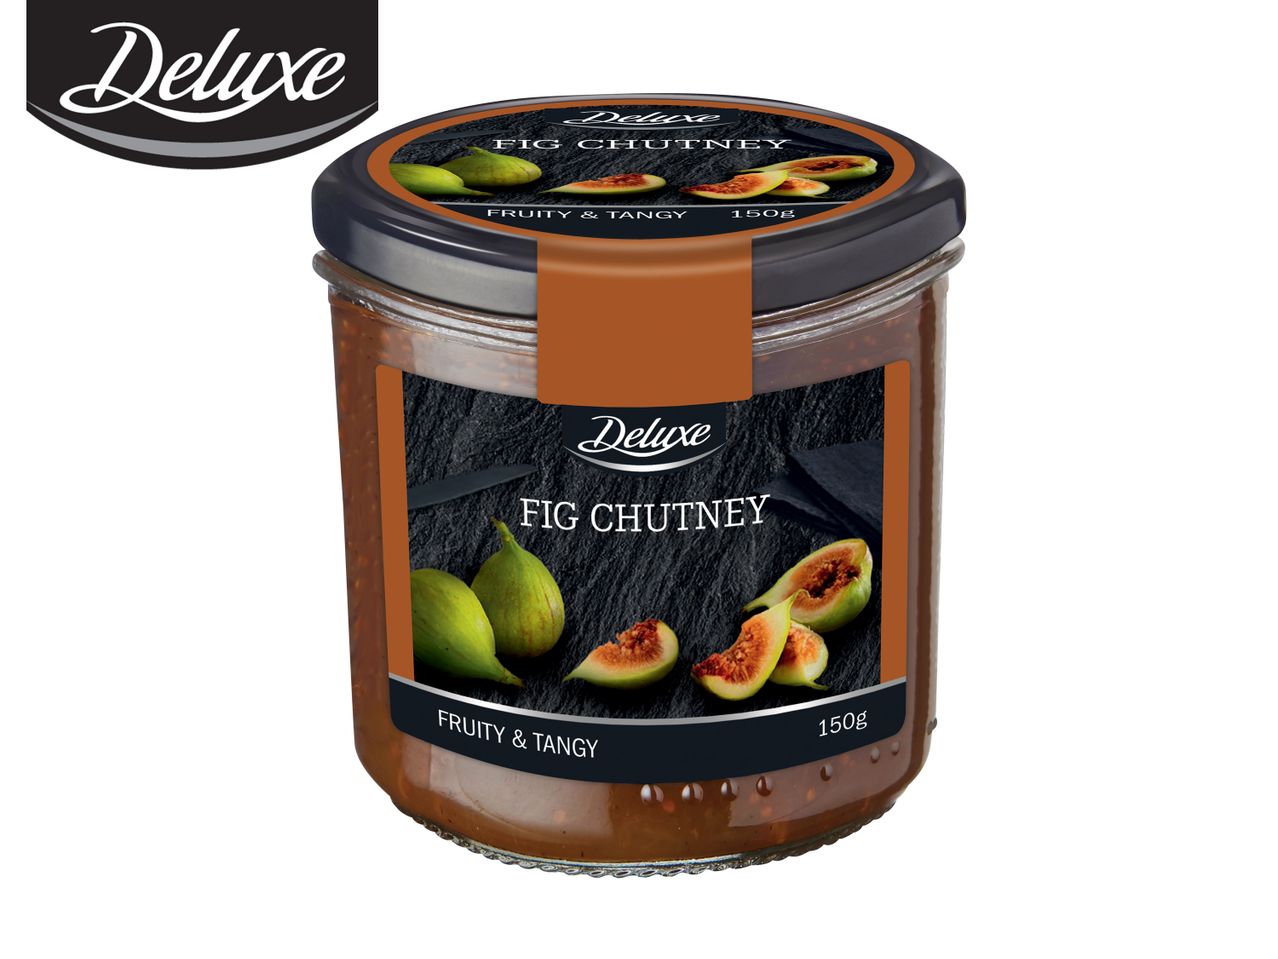 Go to full screen view: Deluxe Fig Chutney - Image 1